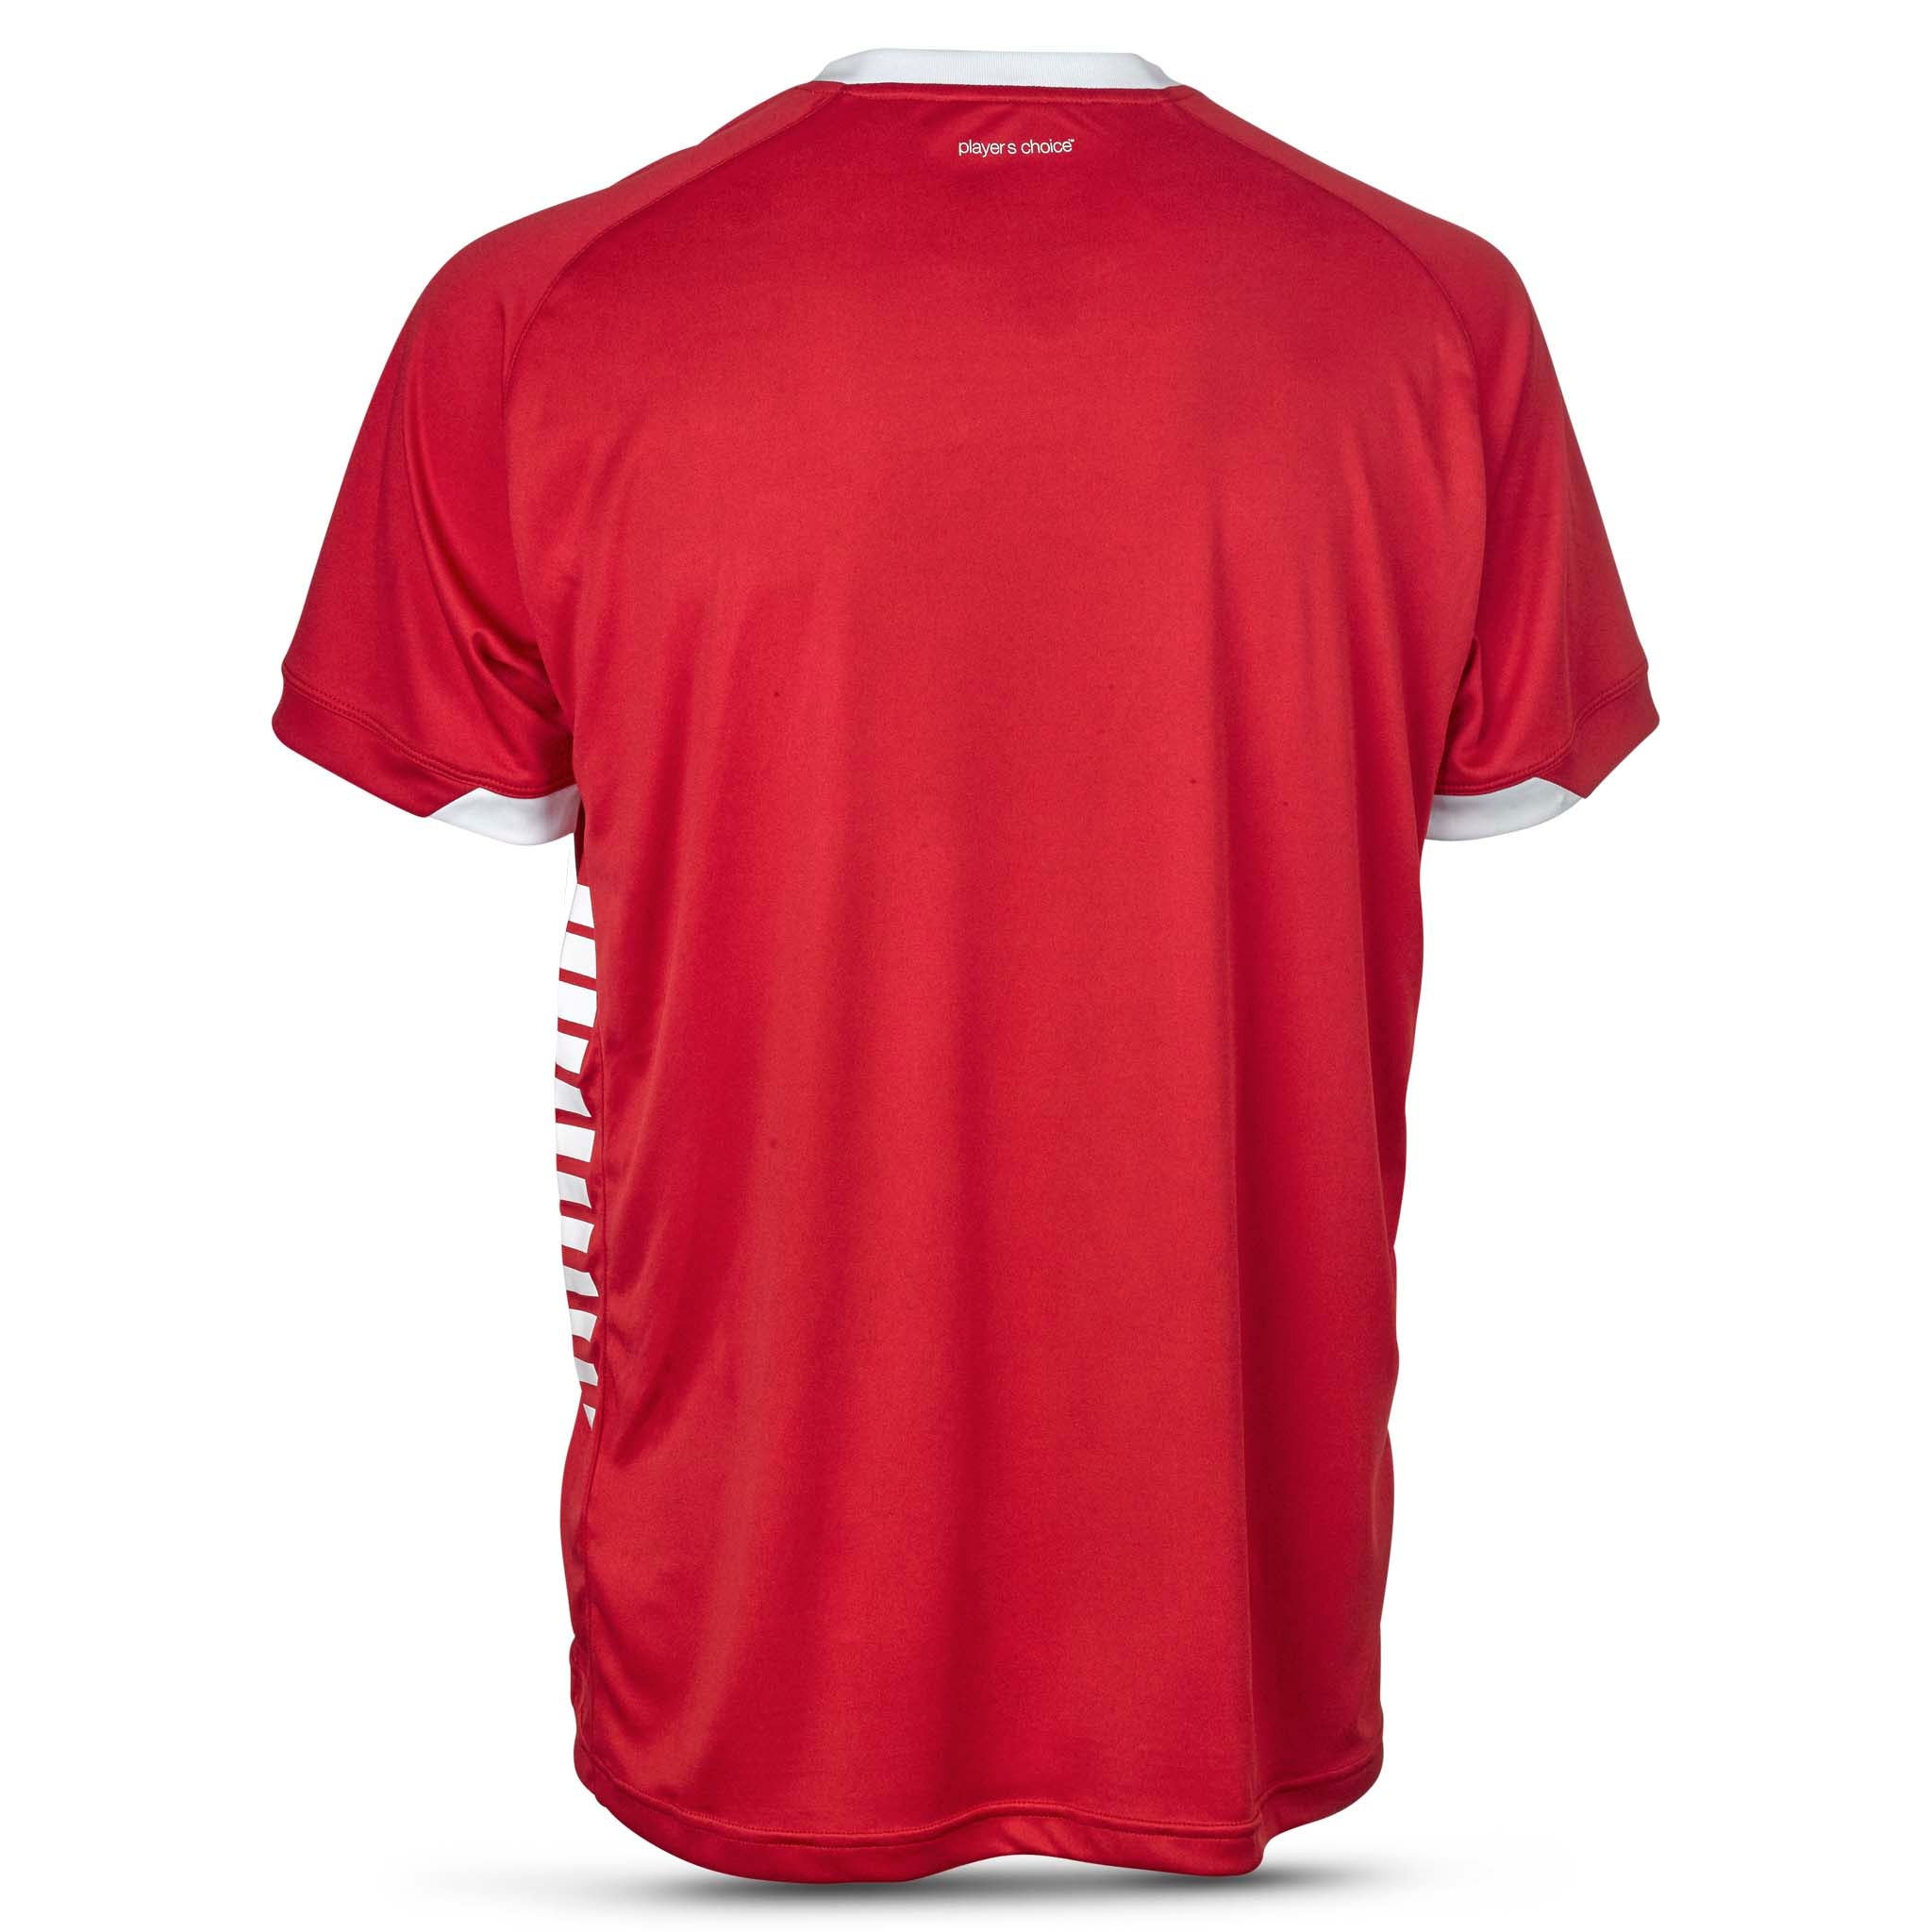 Spain Short Sleeve player shirt #colour_red #colour_red